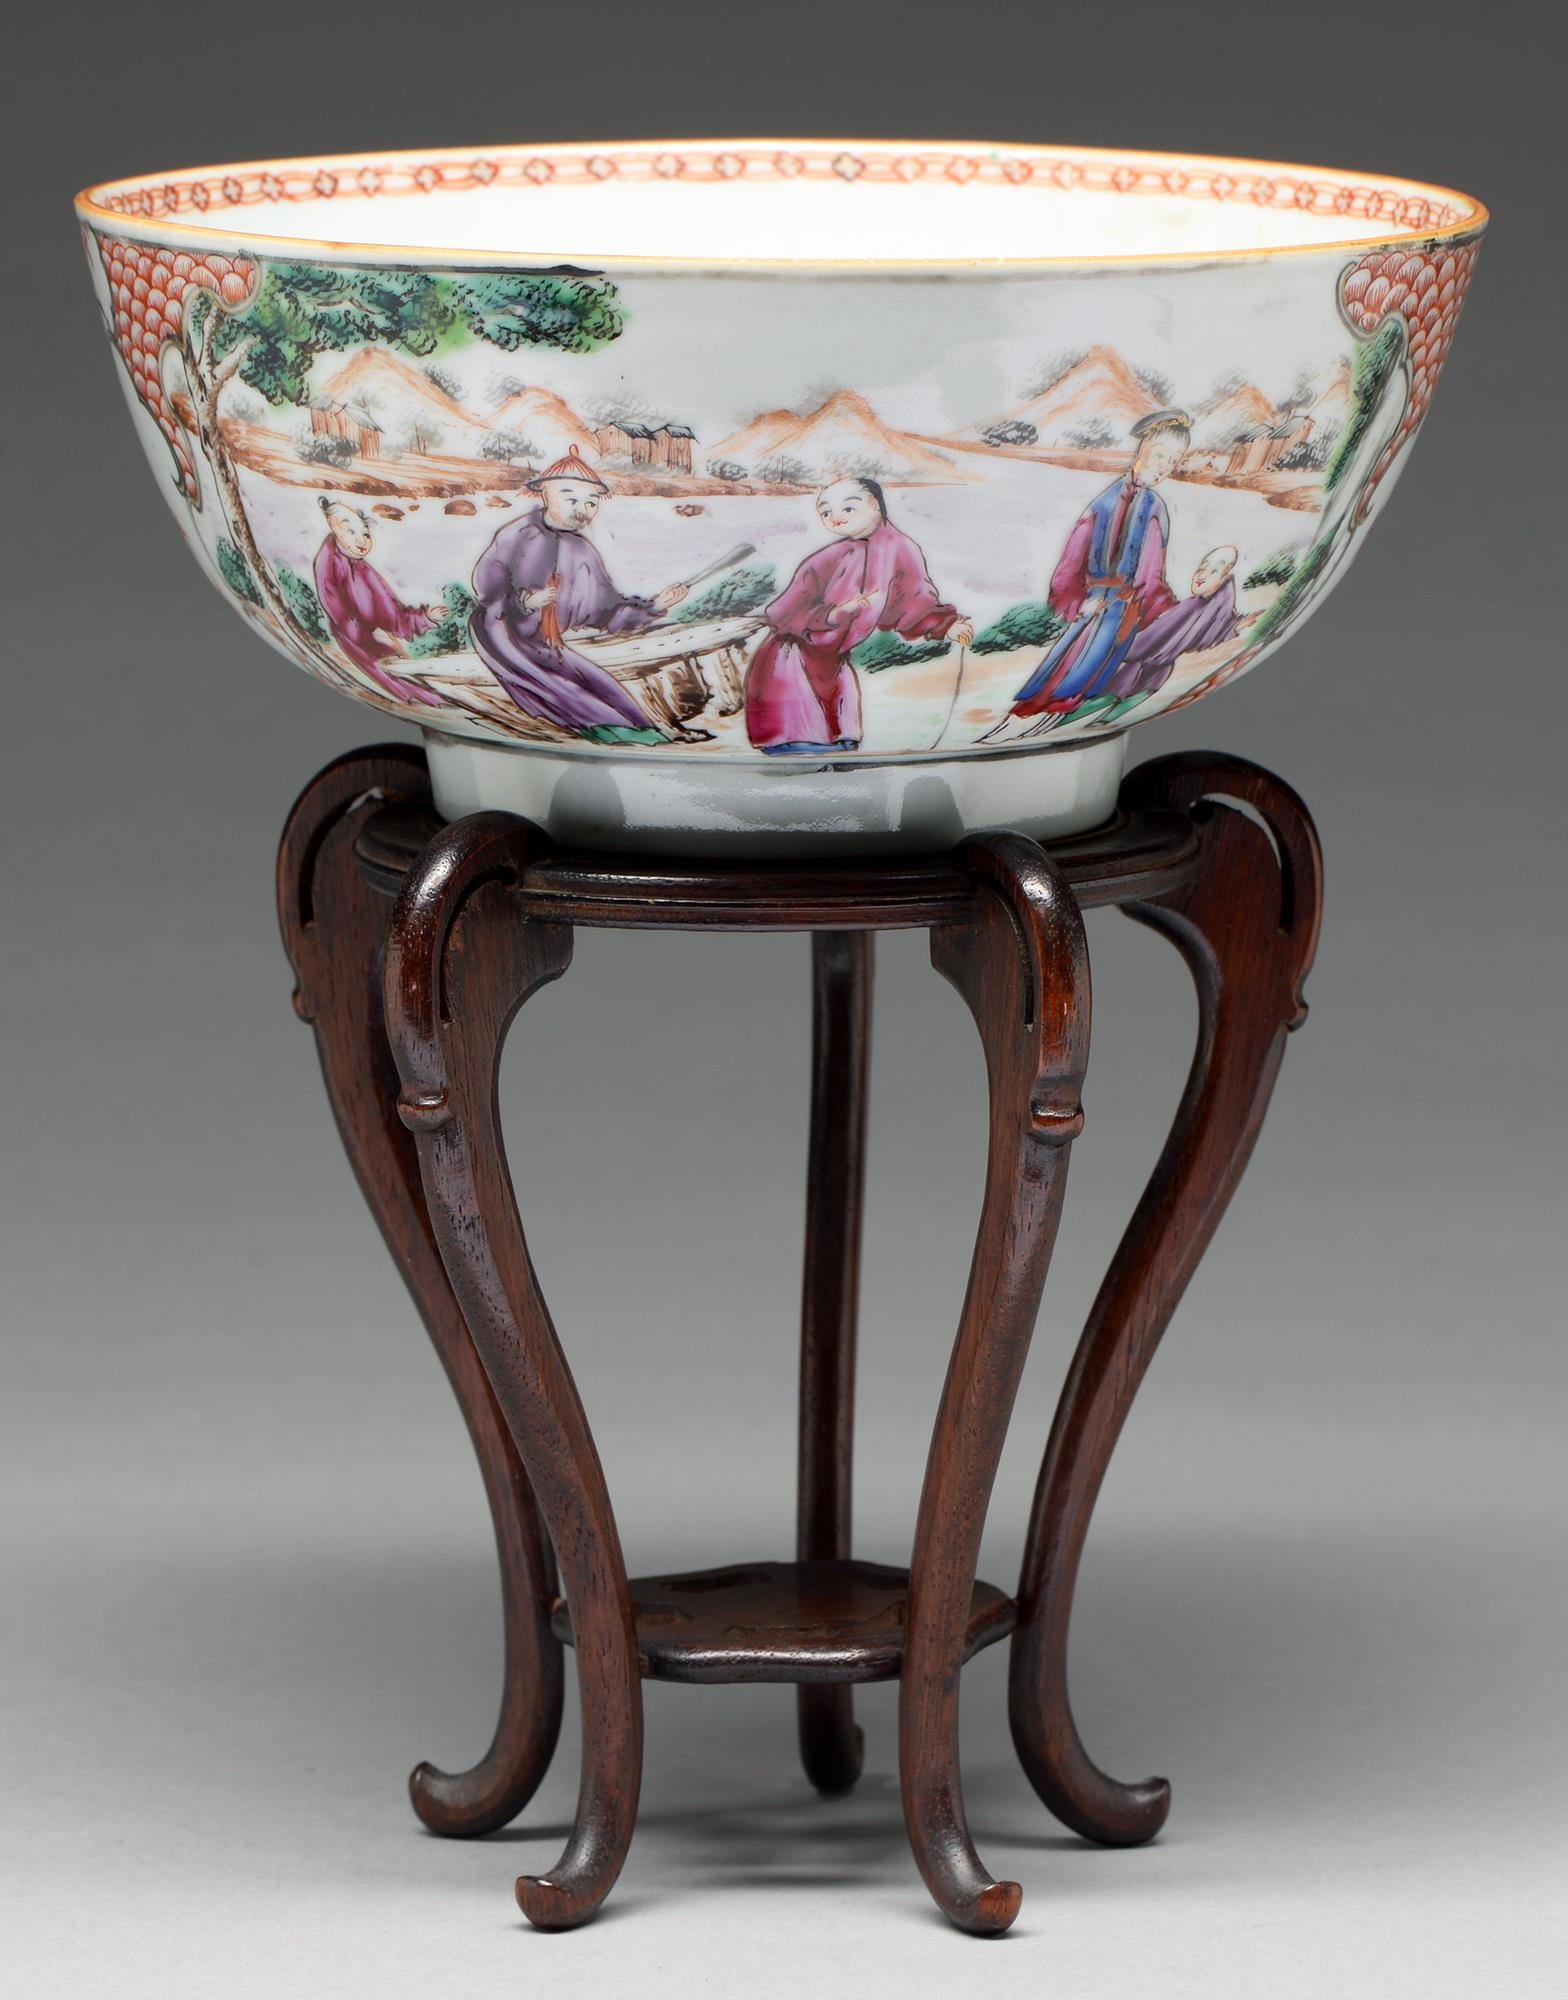 A Chinese famille rose bowl, c1770, painted with two groups of figures by water in a mountainous